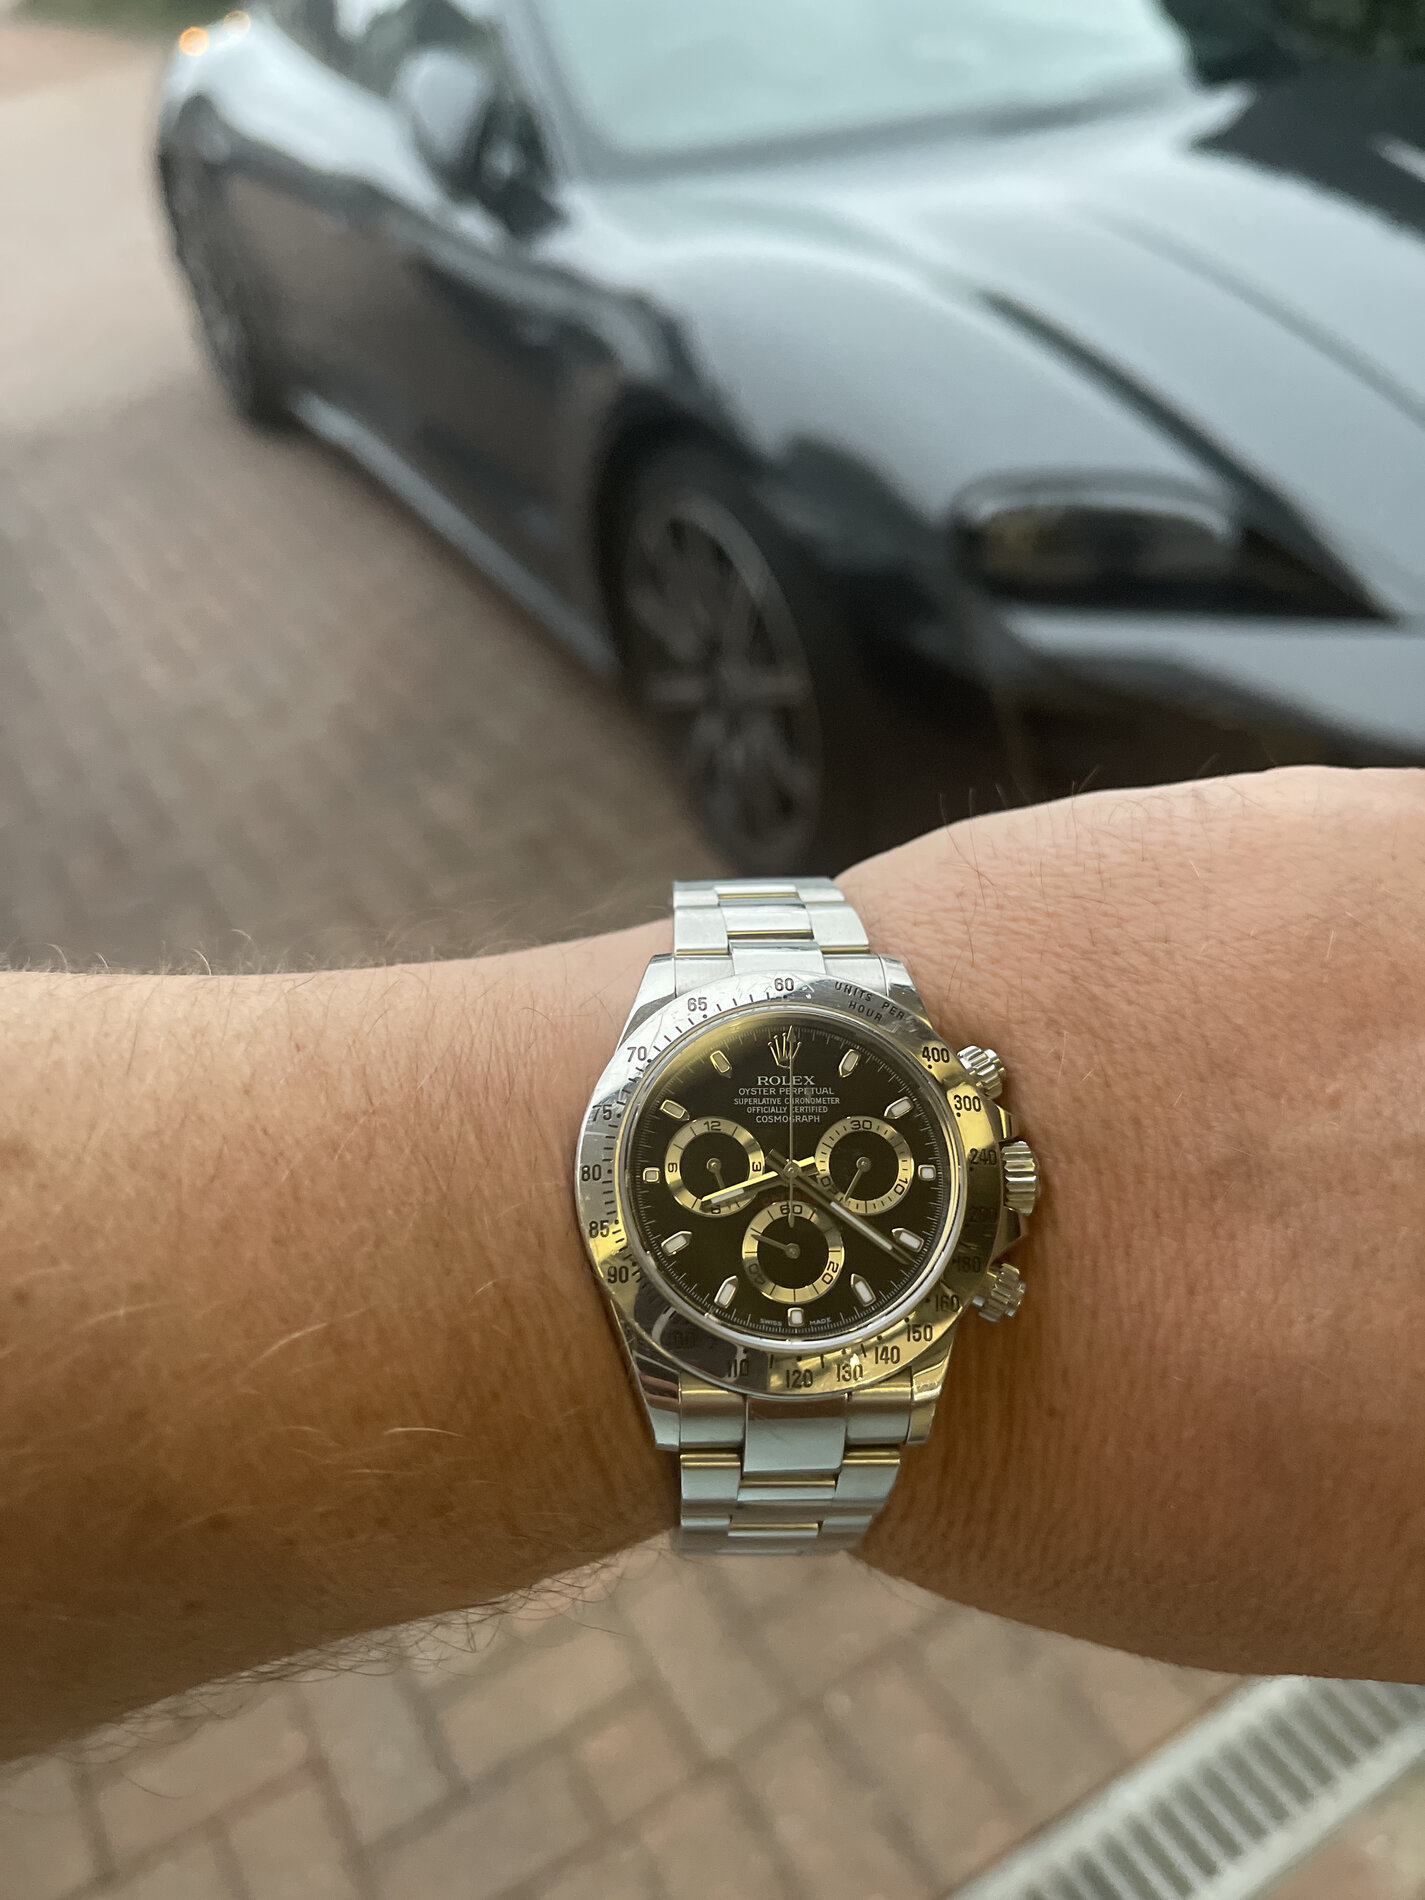 Porsche Taycan Watch collectors - let's talk watches here! image